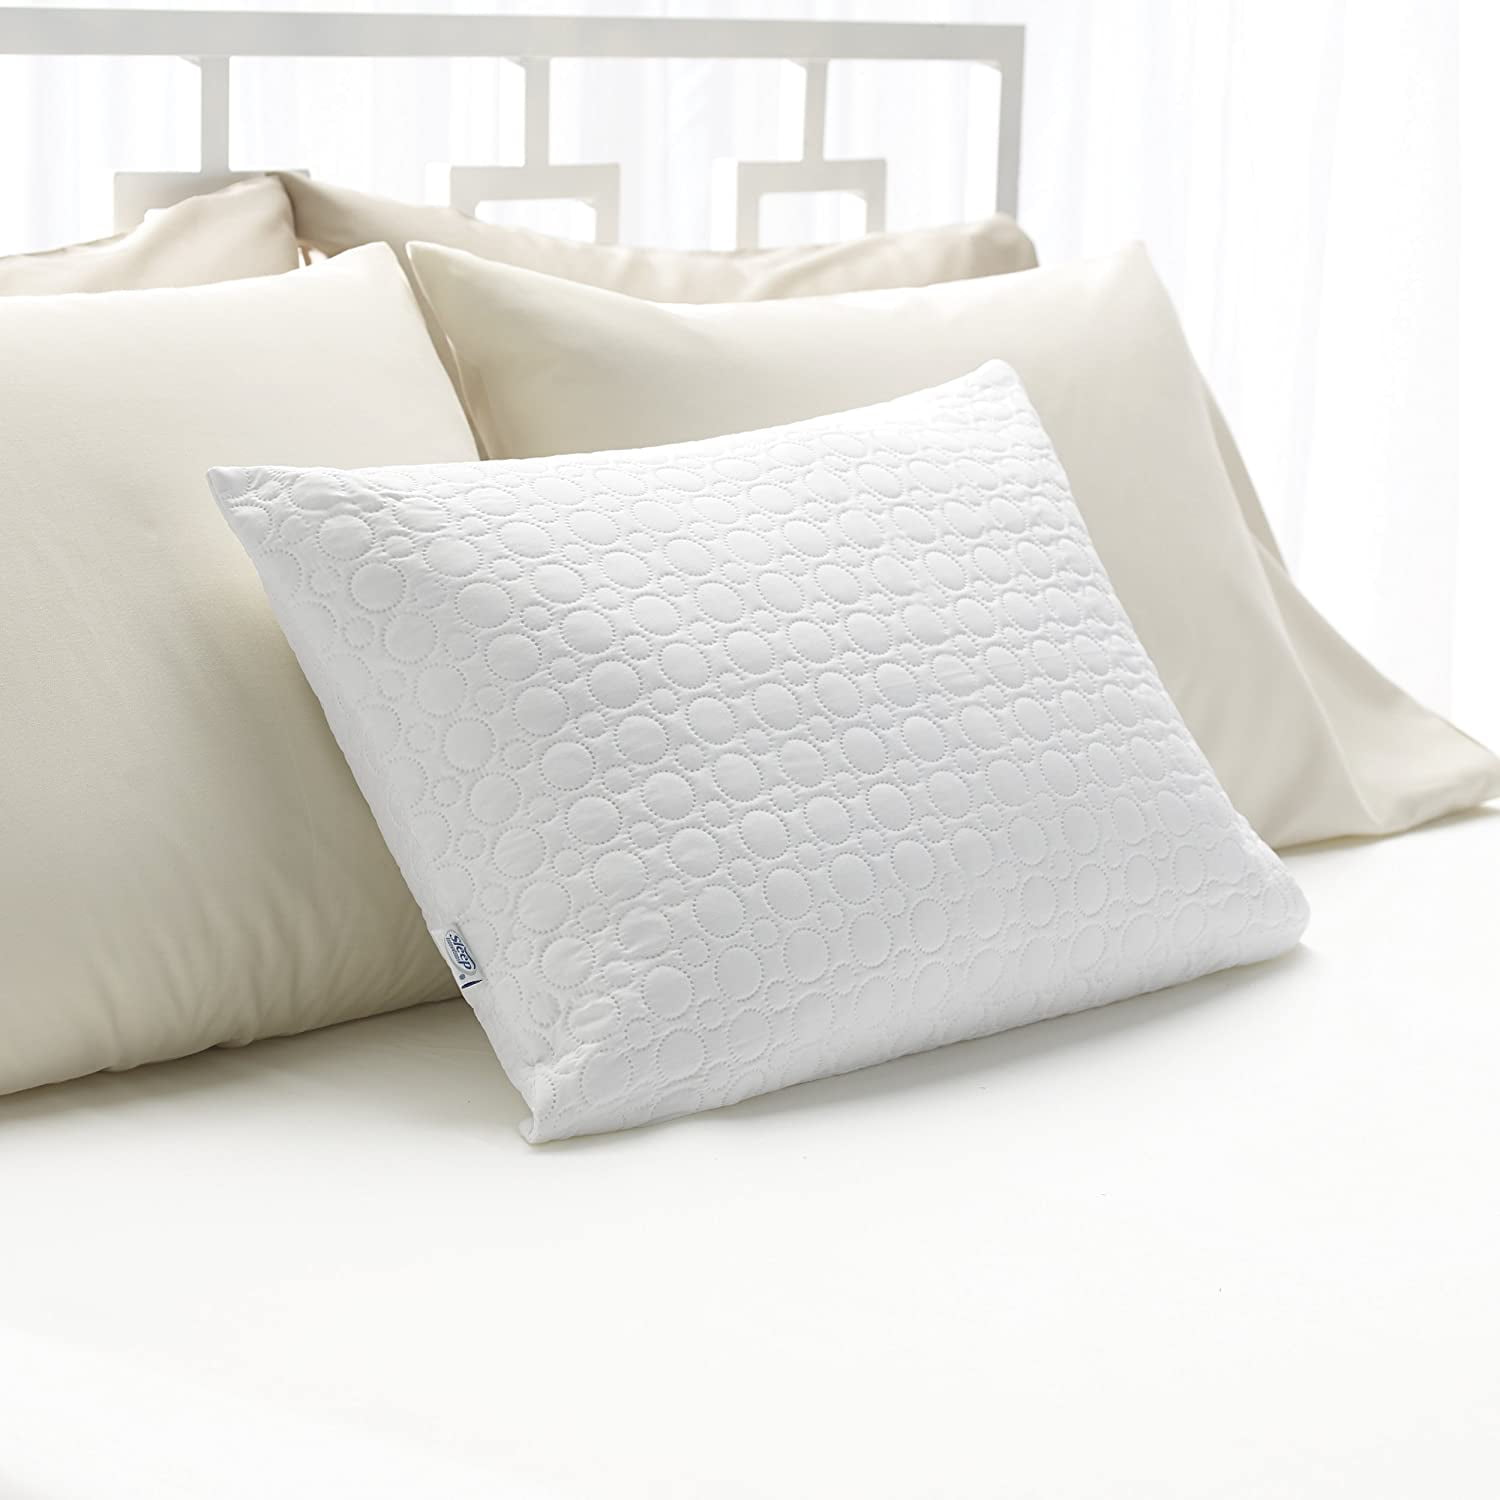 Sleep Innovations Quilted Memory Foam Micro-Cushion Pillow Soft Microfiber Cover Standard